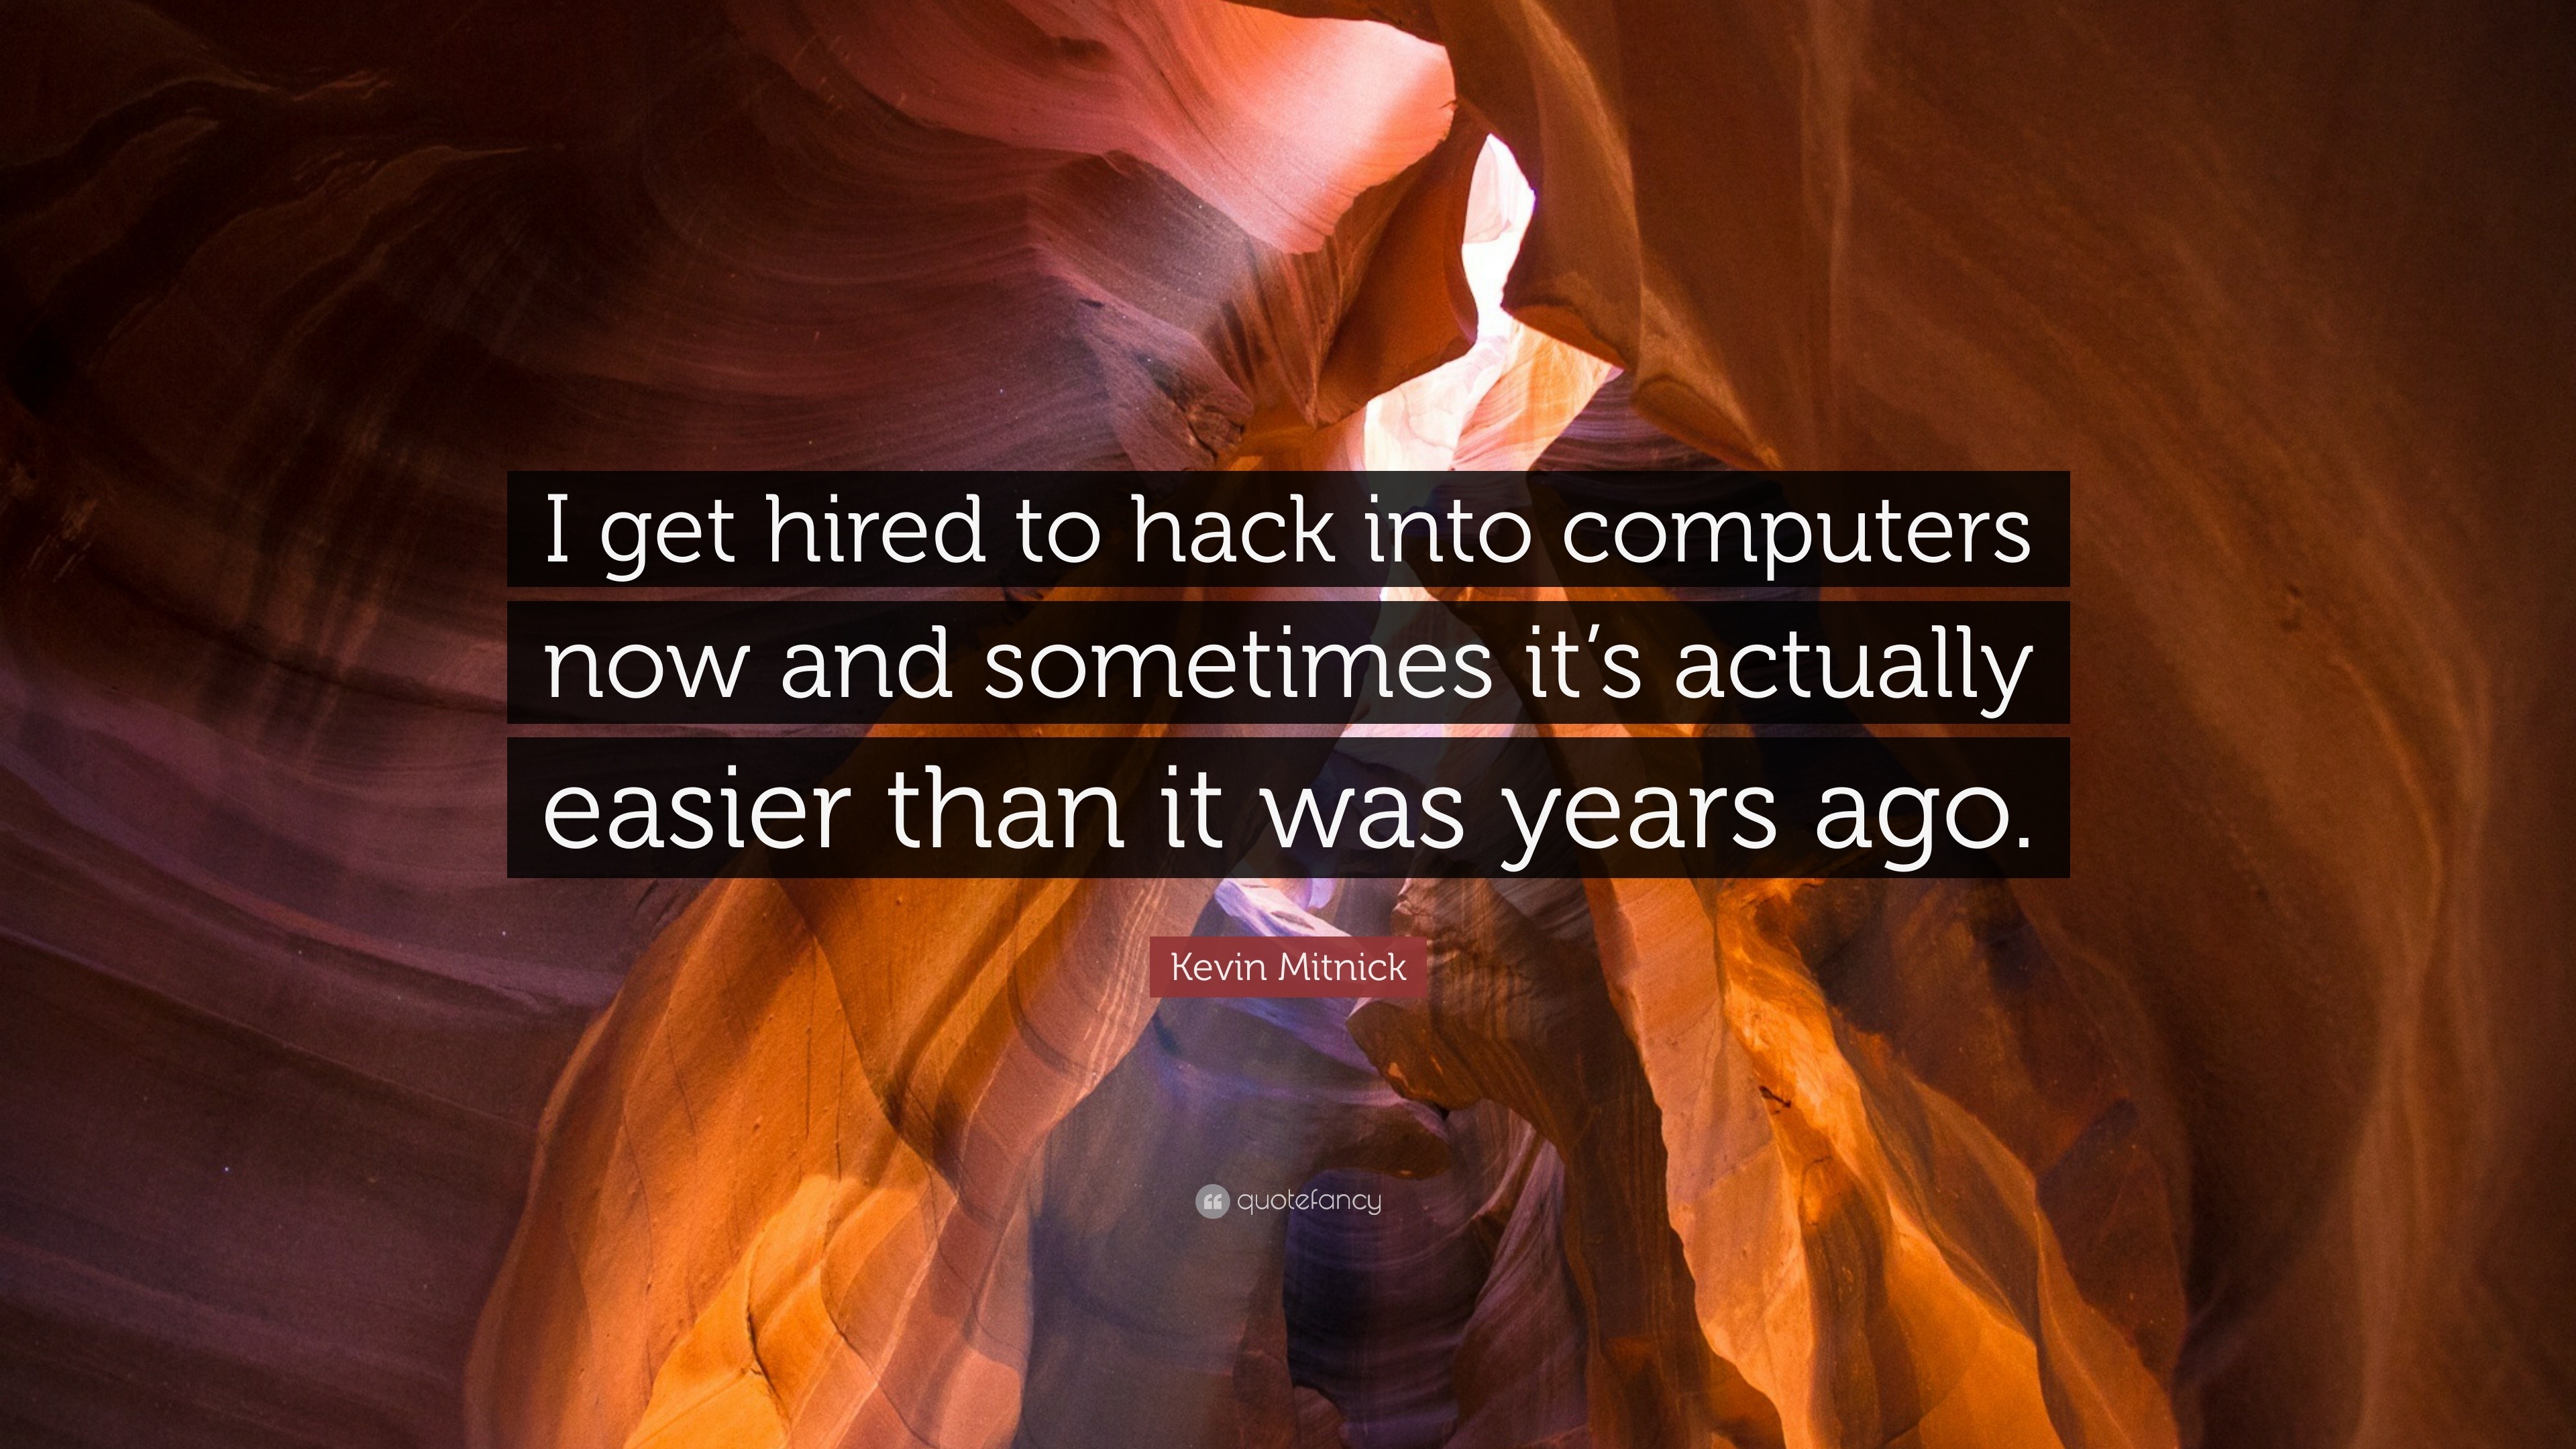 Kevin Mitnick Quote “I get hired to hack into computers now and